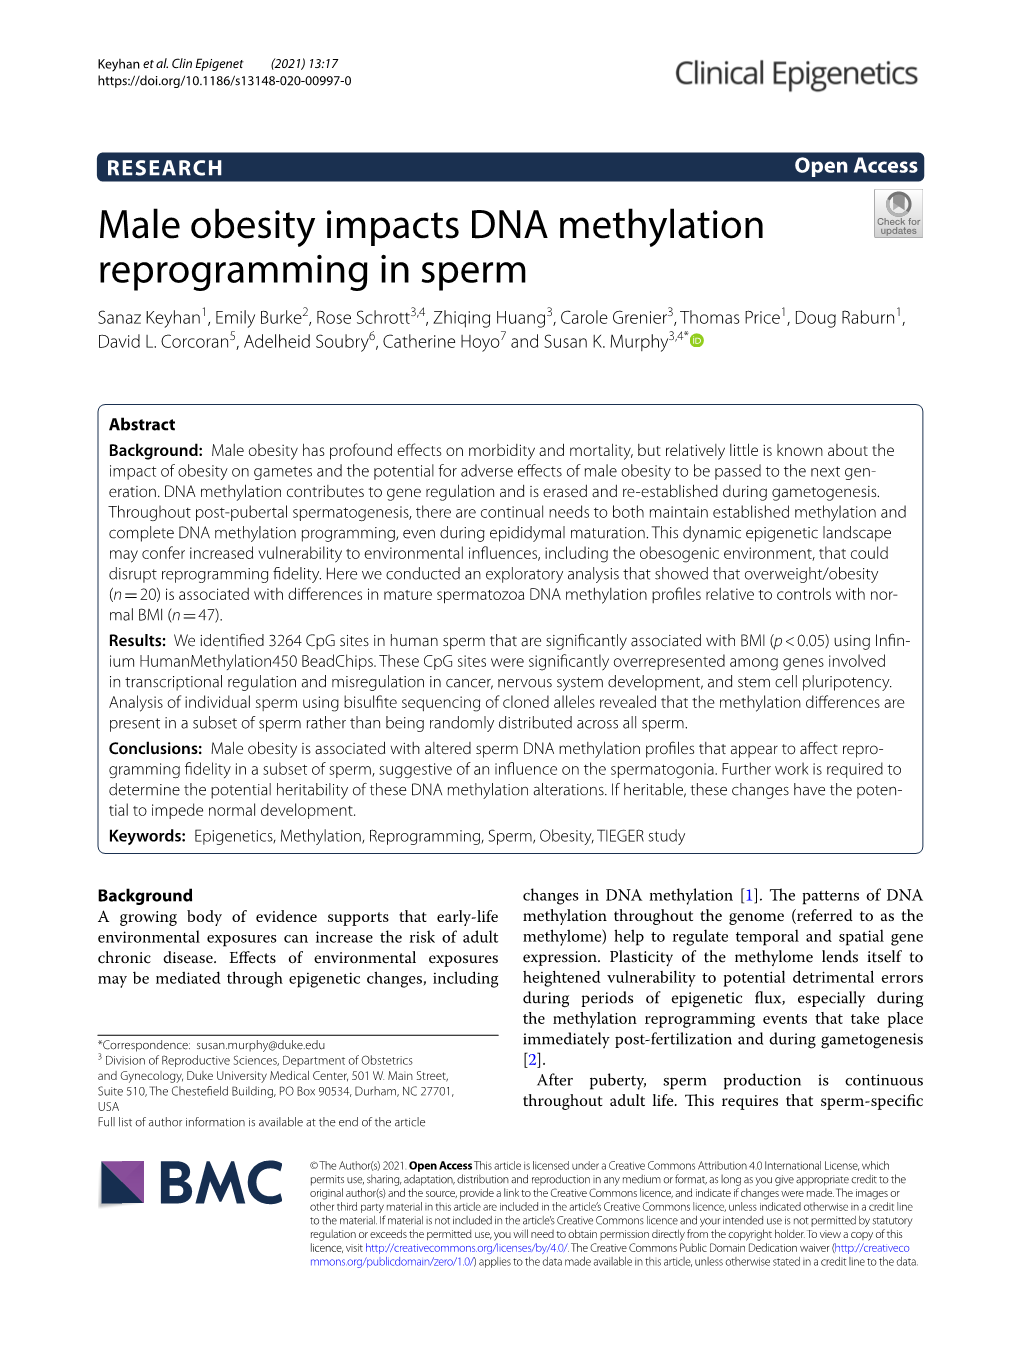 Male Obesity Impacts DNA Methylation Reprogramming in Sperm